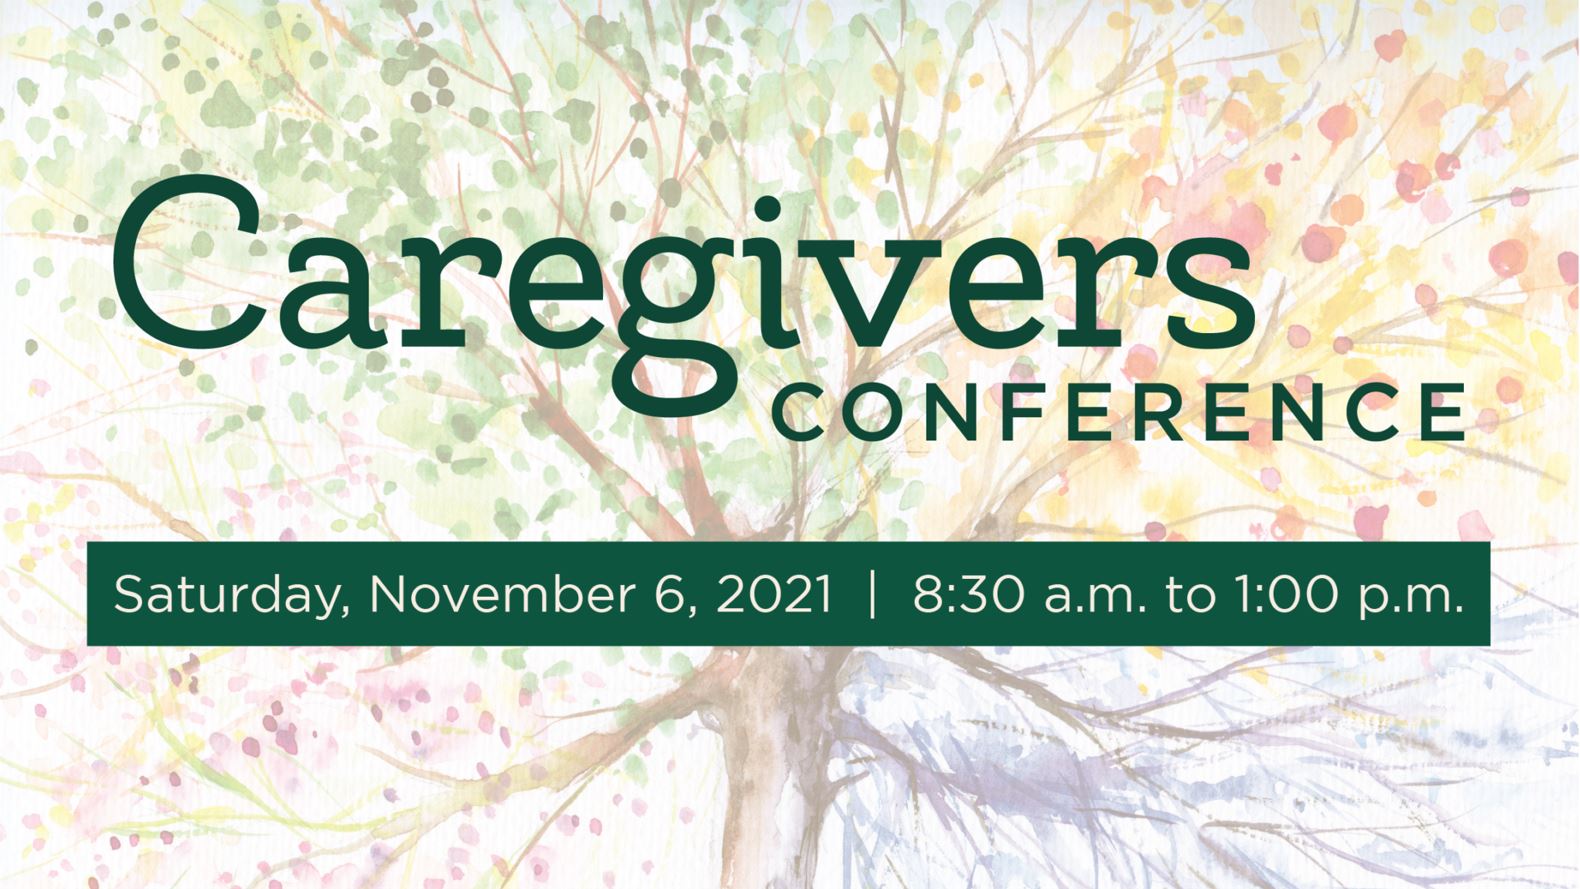 Fall 2021 Caregiver's Conference CarePartners